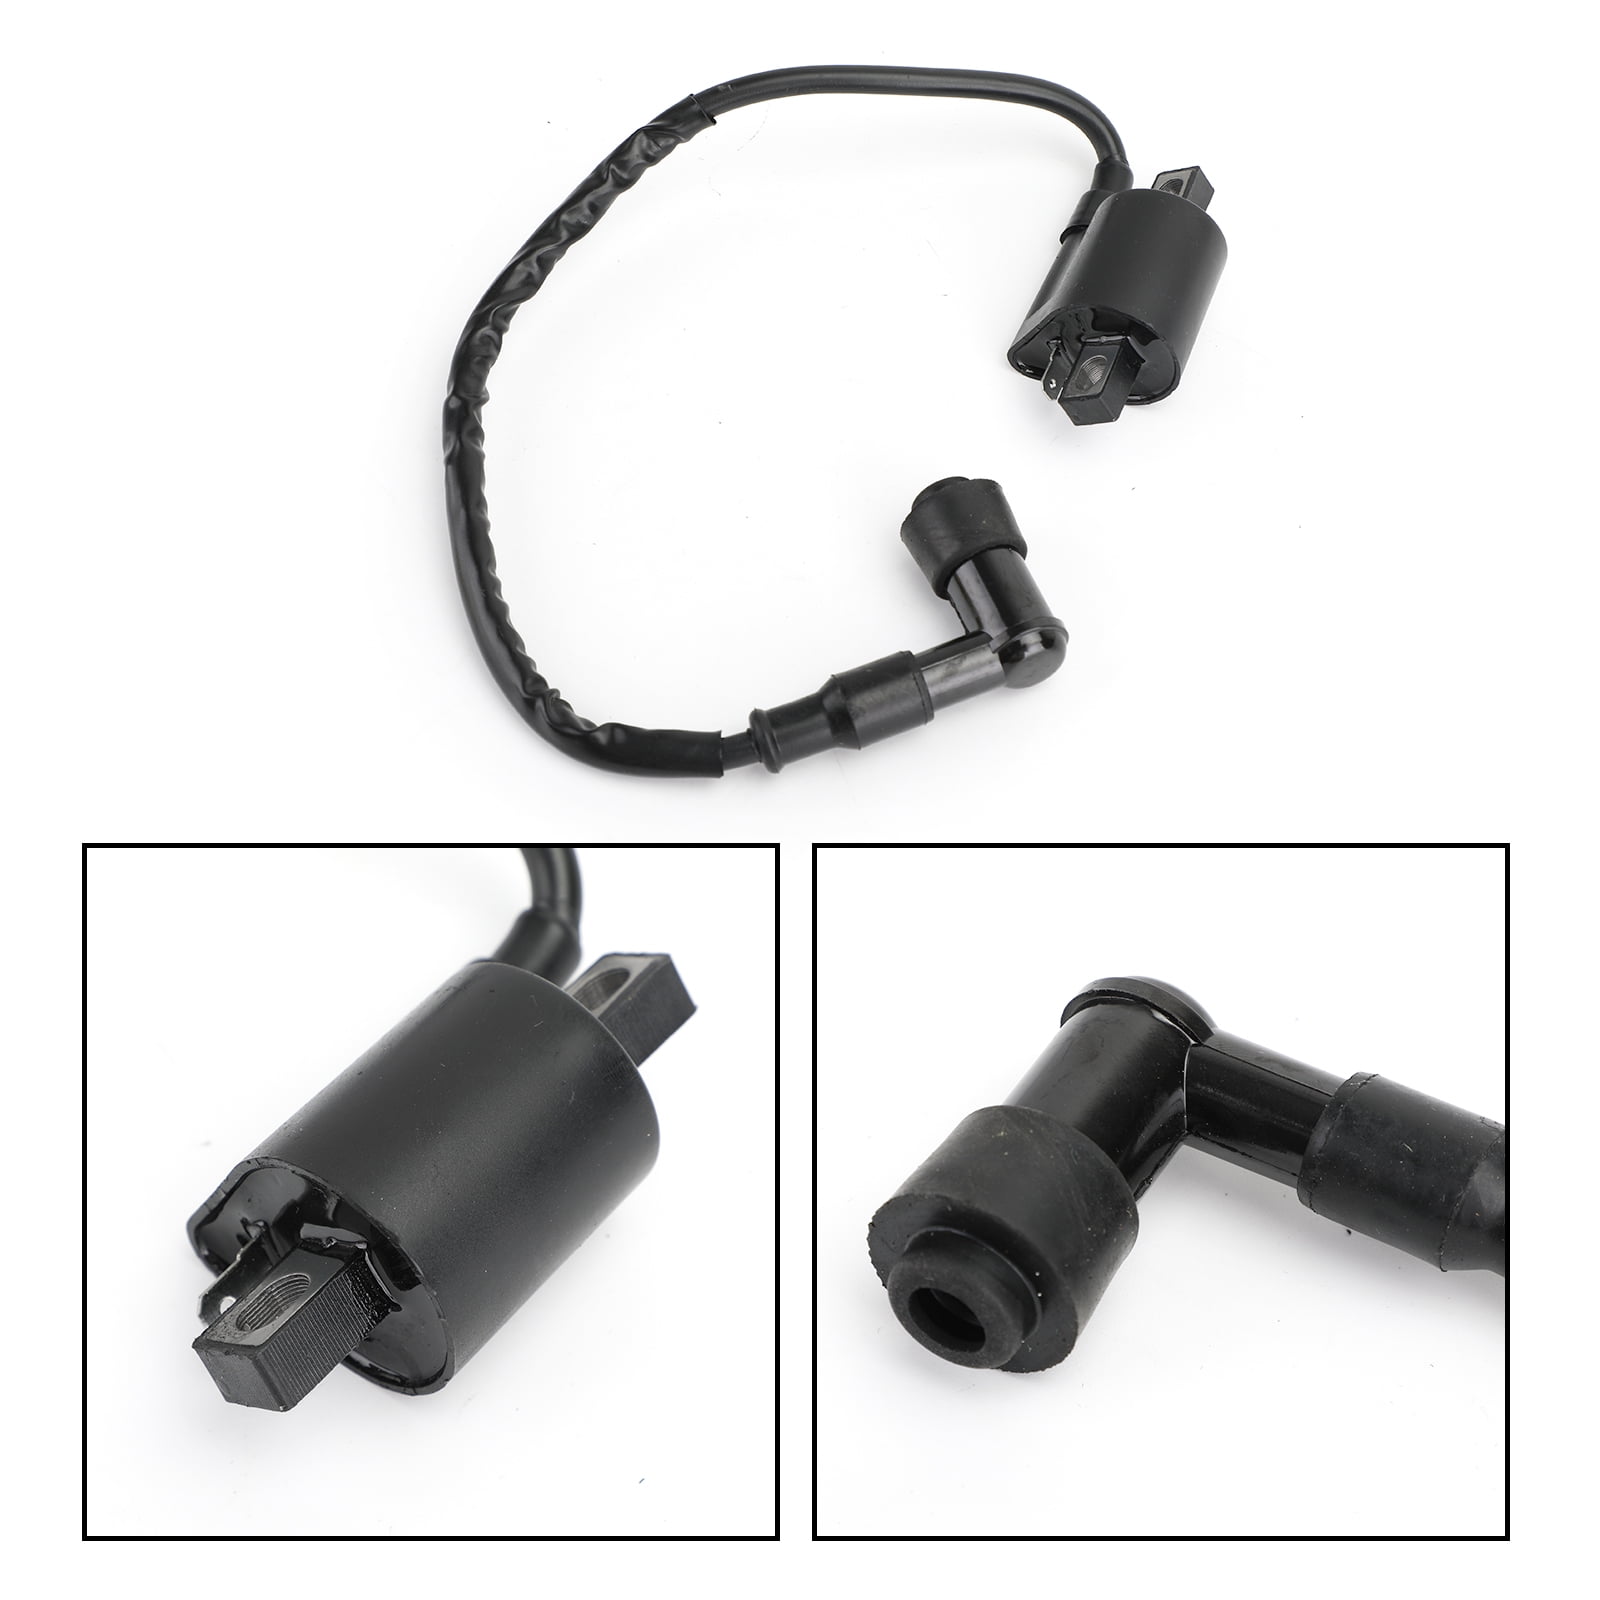 GOOFIT Racing Ignition Coil for CG 125cc 150cc 200cc 250cc ATV Scooter Moped H053-045 